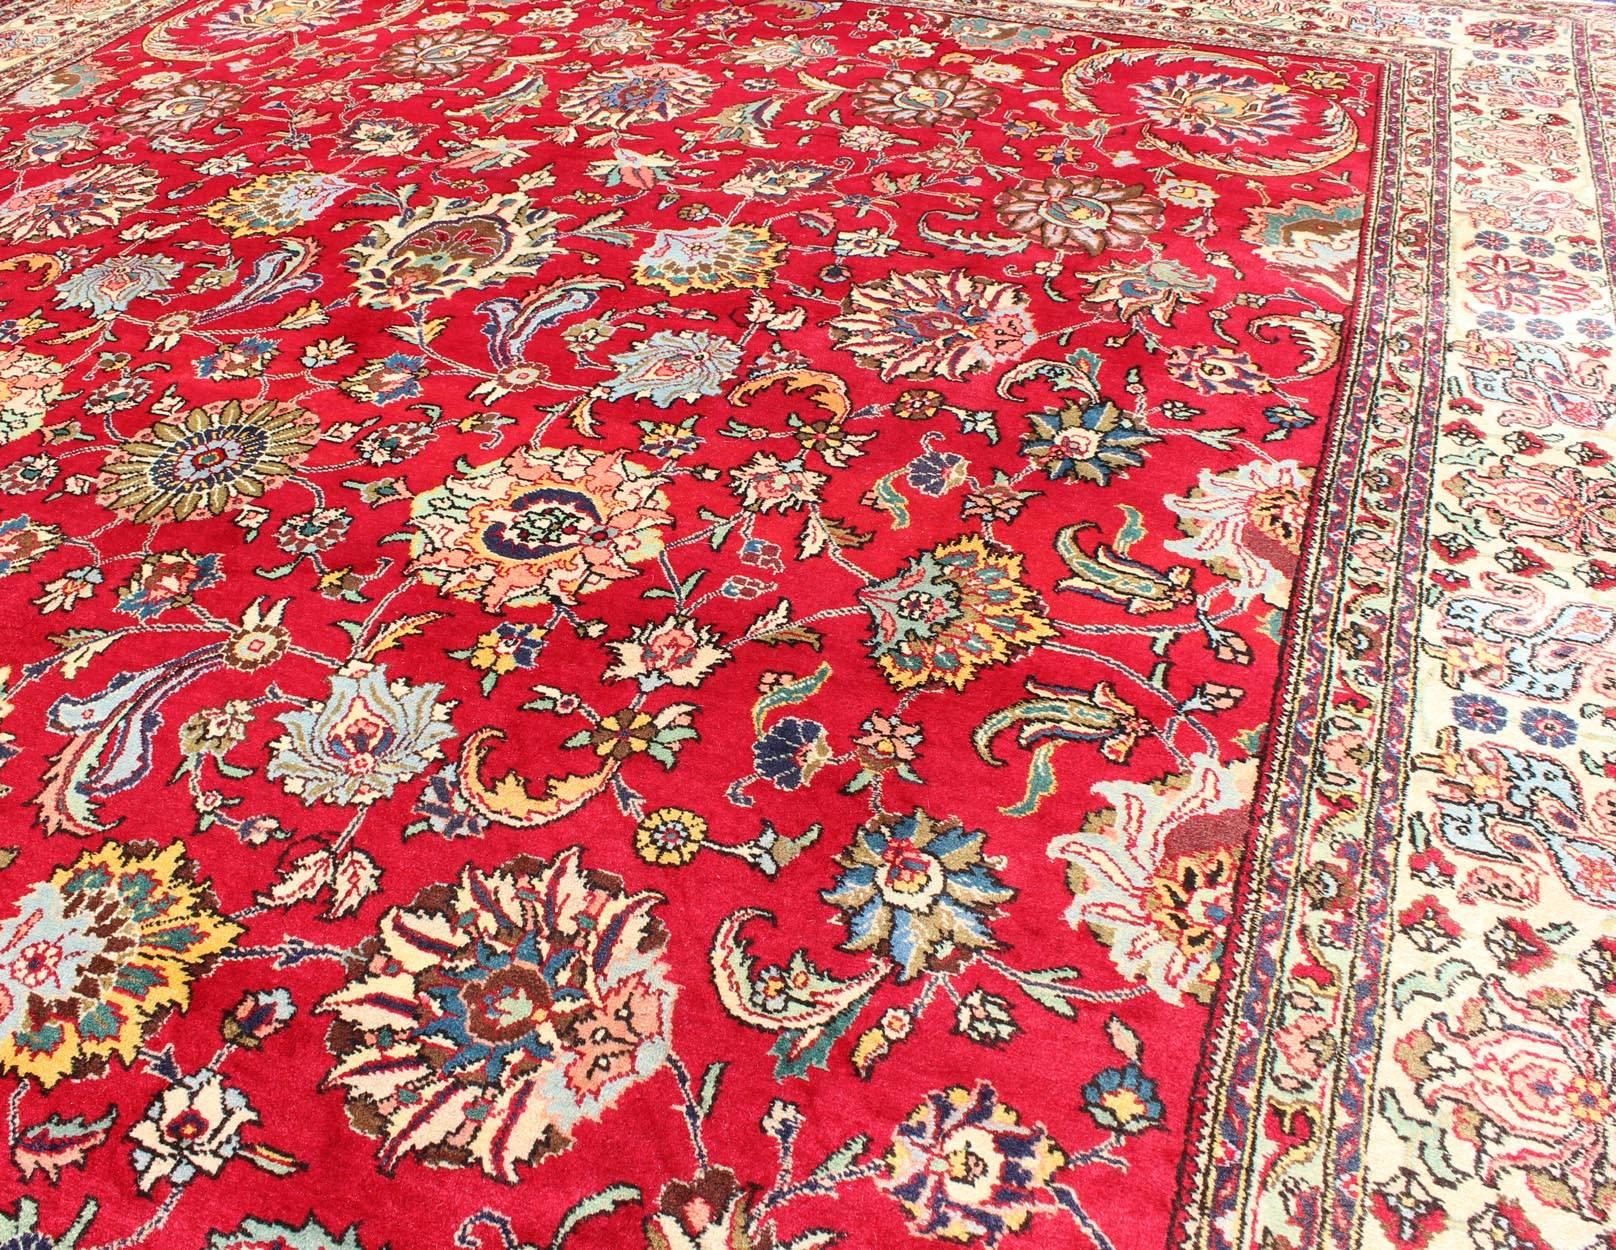 Semi Antique Persian Tabriz Rug with All-Over Blossom Design In Red and Ivory  For Sale 4